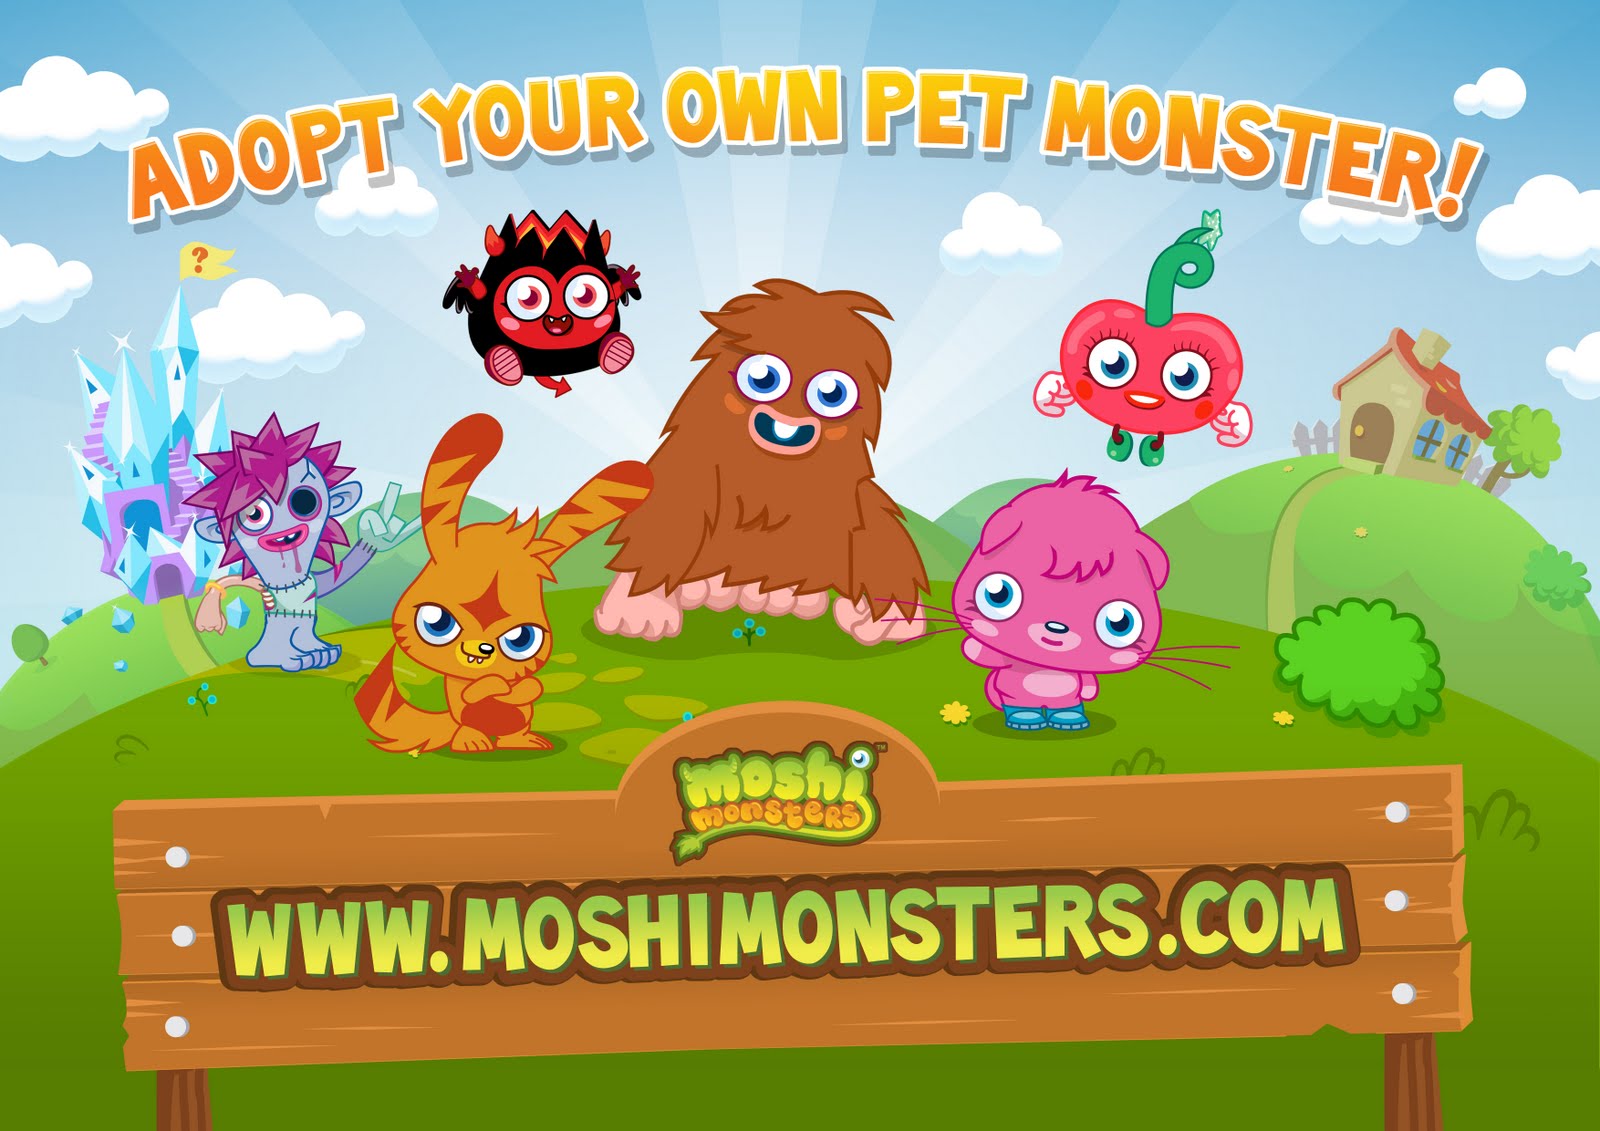 Adopt a monster now at MoshiMonsterscom just click the picture